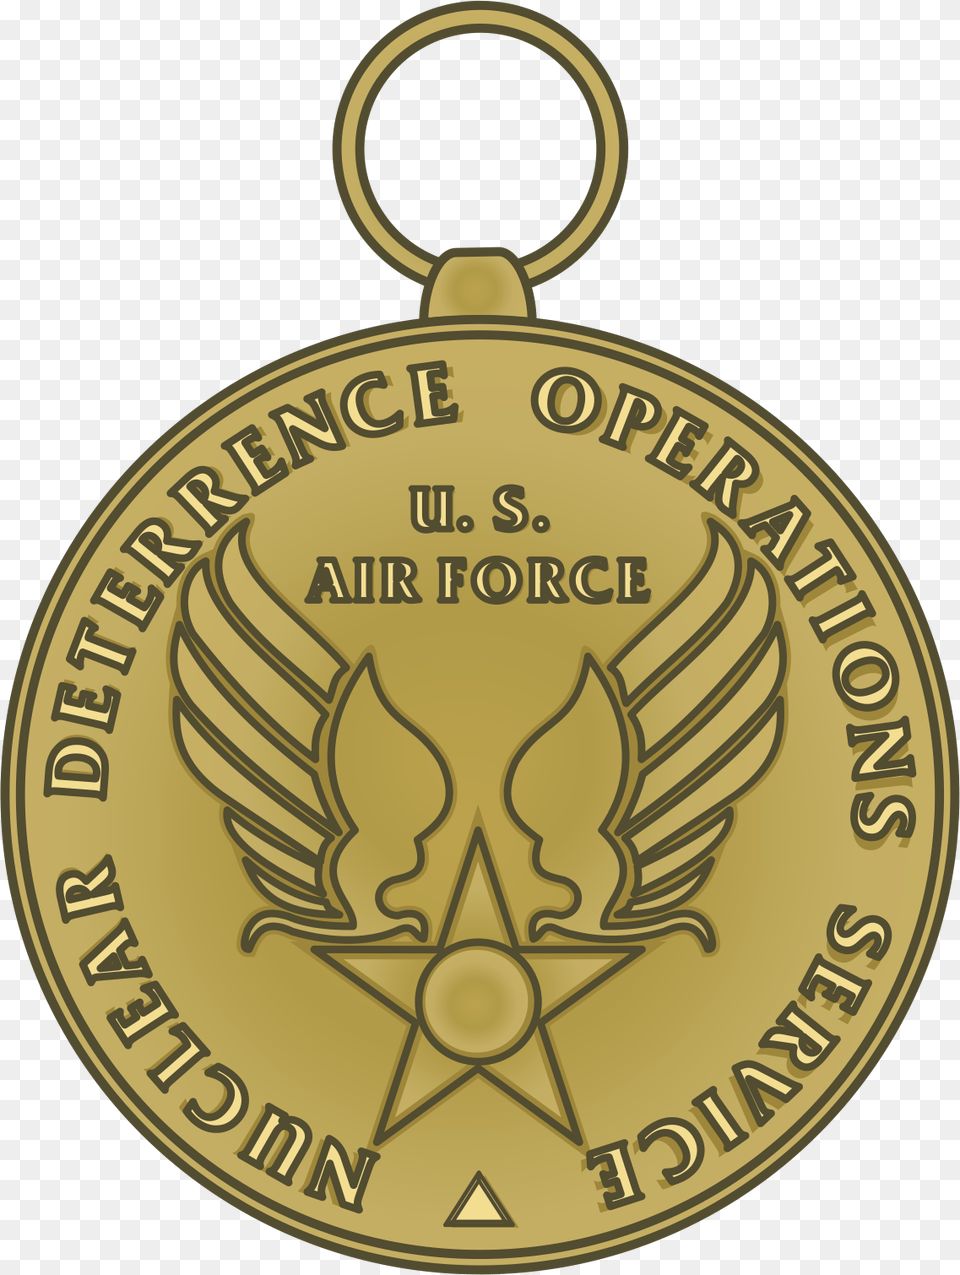 Af Releases Criteria For New Service Medal Air Force Nuclear Deterrence Operations Service Medal, Gold, Ammunition, Grenade, Weapon Free Png